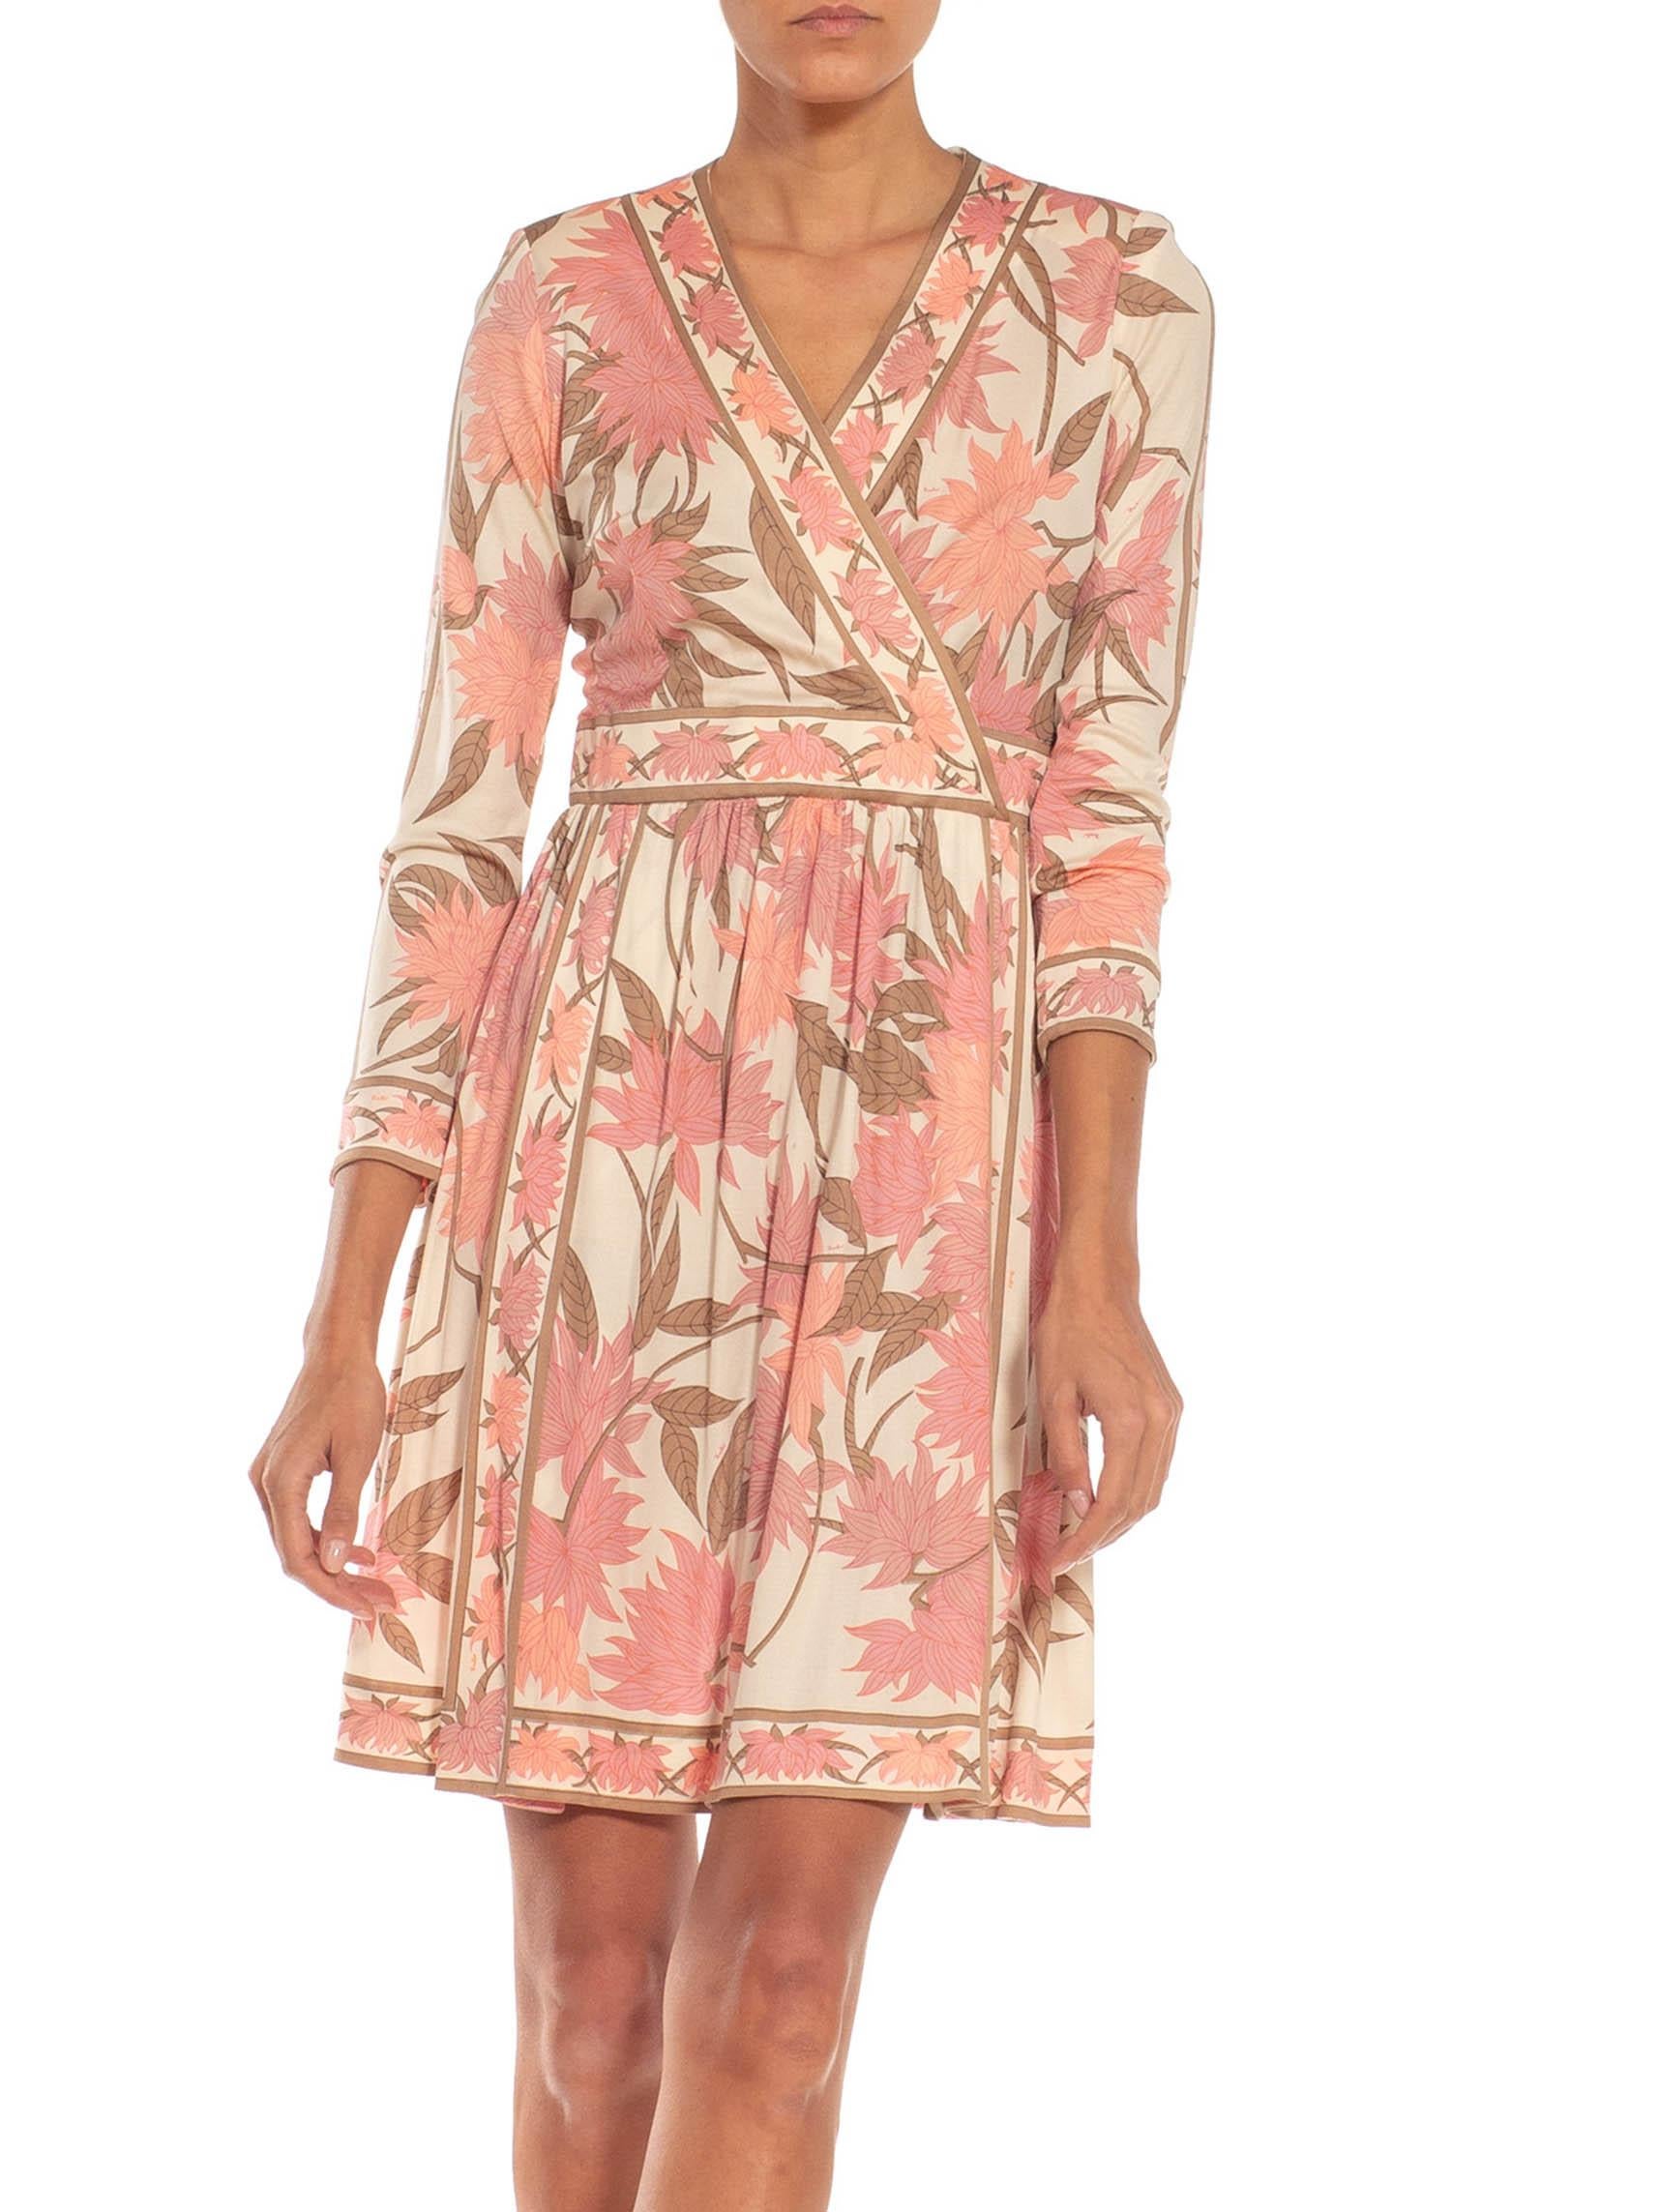 1970S EMILIO PUCCI Cream, Brown & Pink Floral Silk Rayon Blend Signed Dress For Sale 3